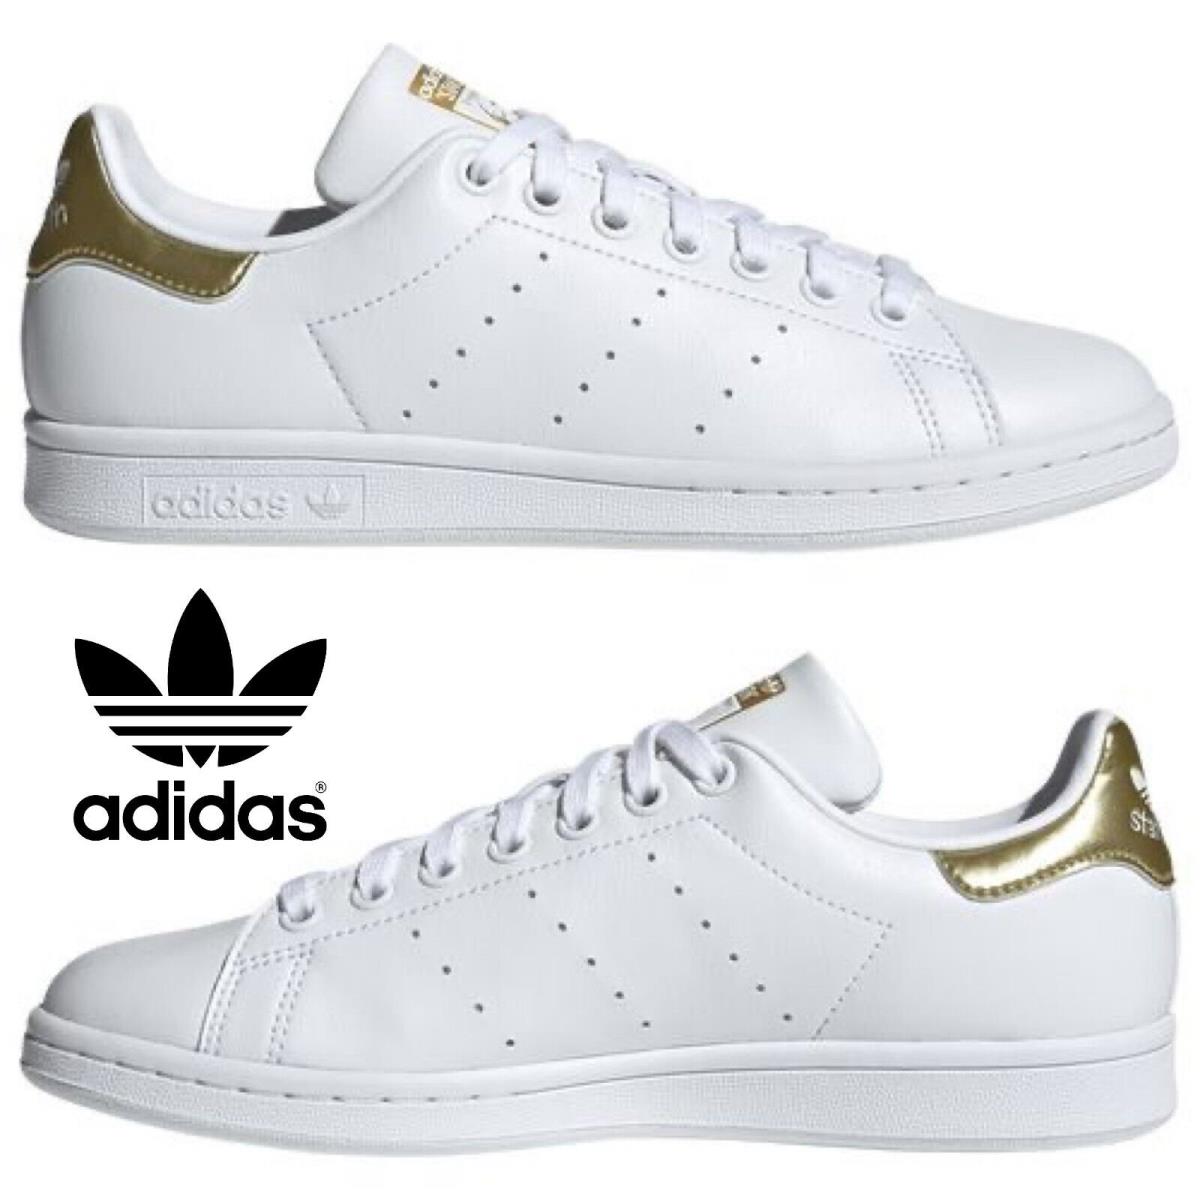 Adidas Originals Stan Smith Women s Sneakers Casual Shoes Sport Gym Gold White